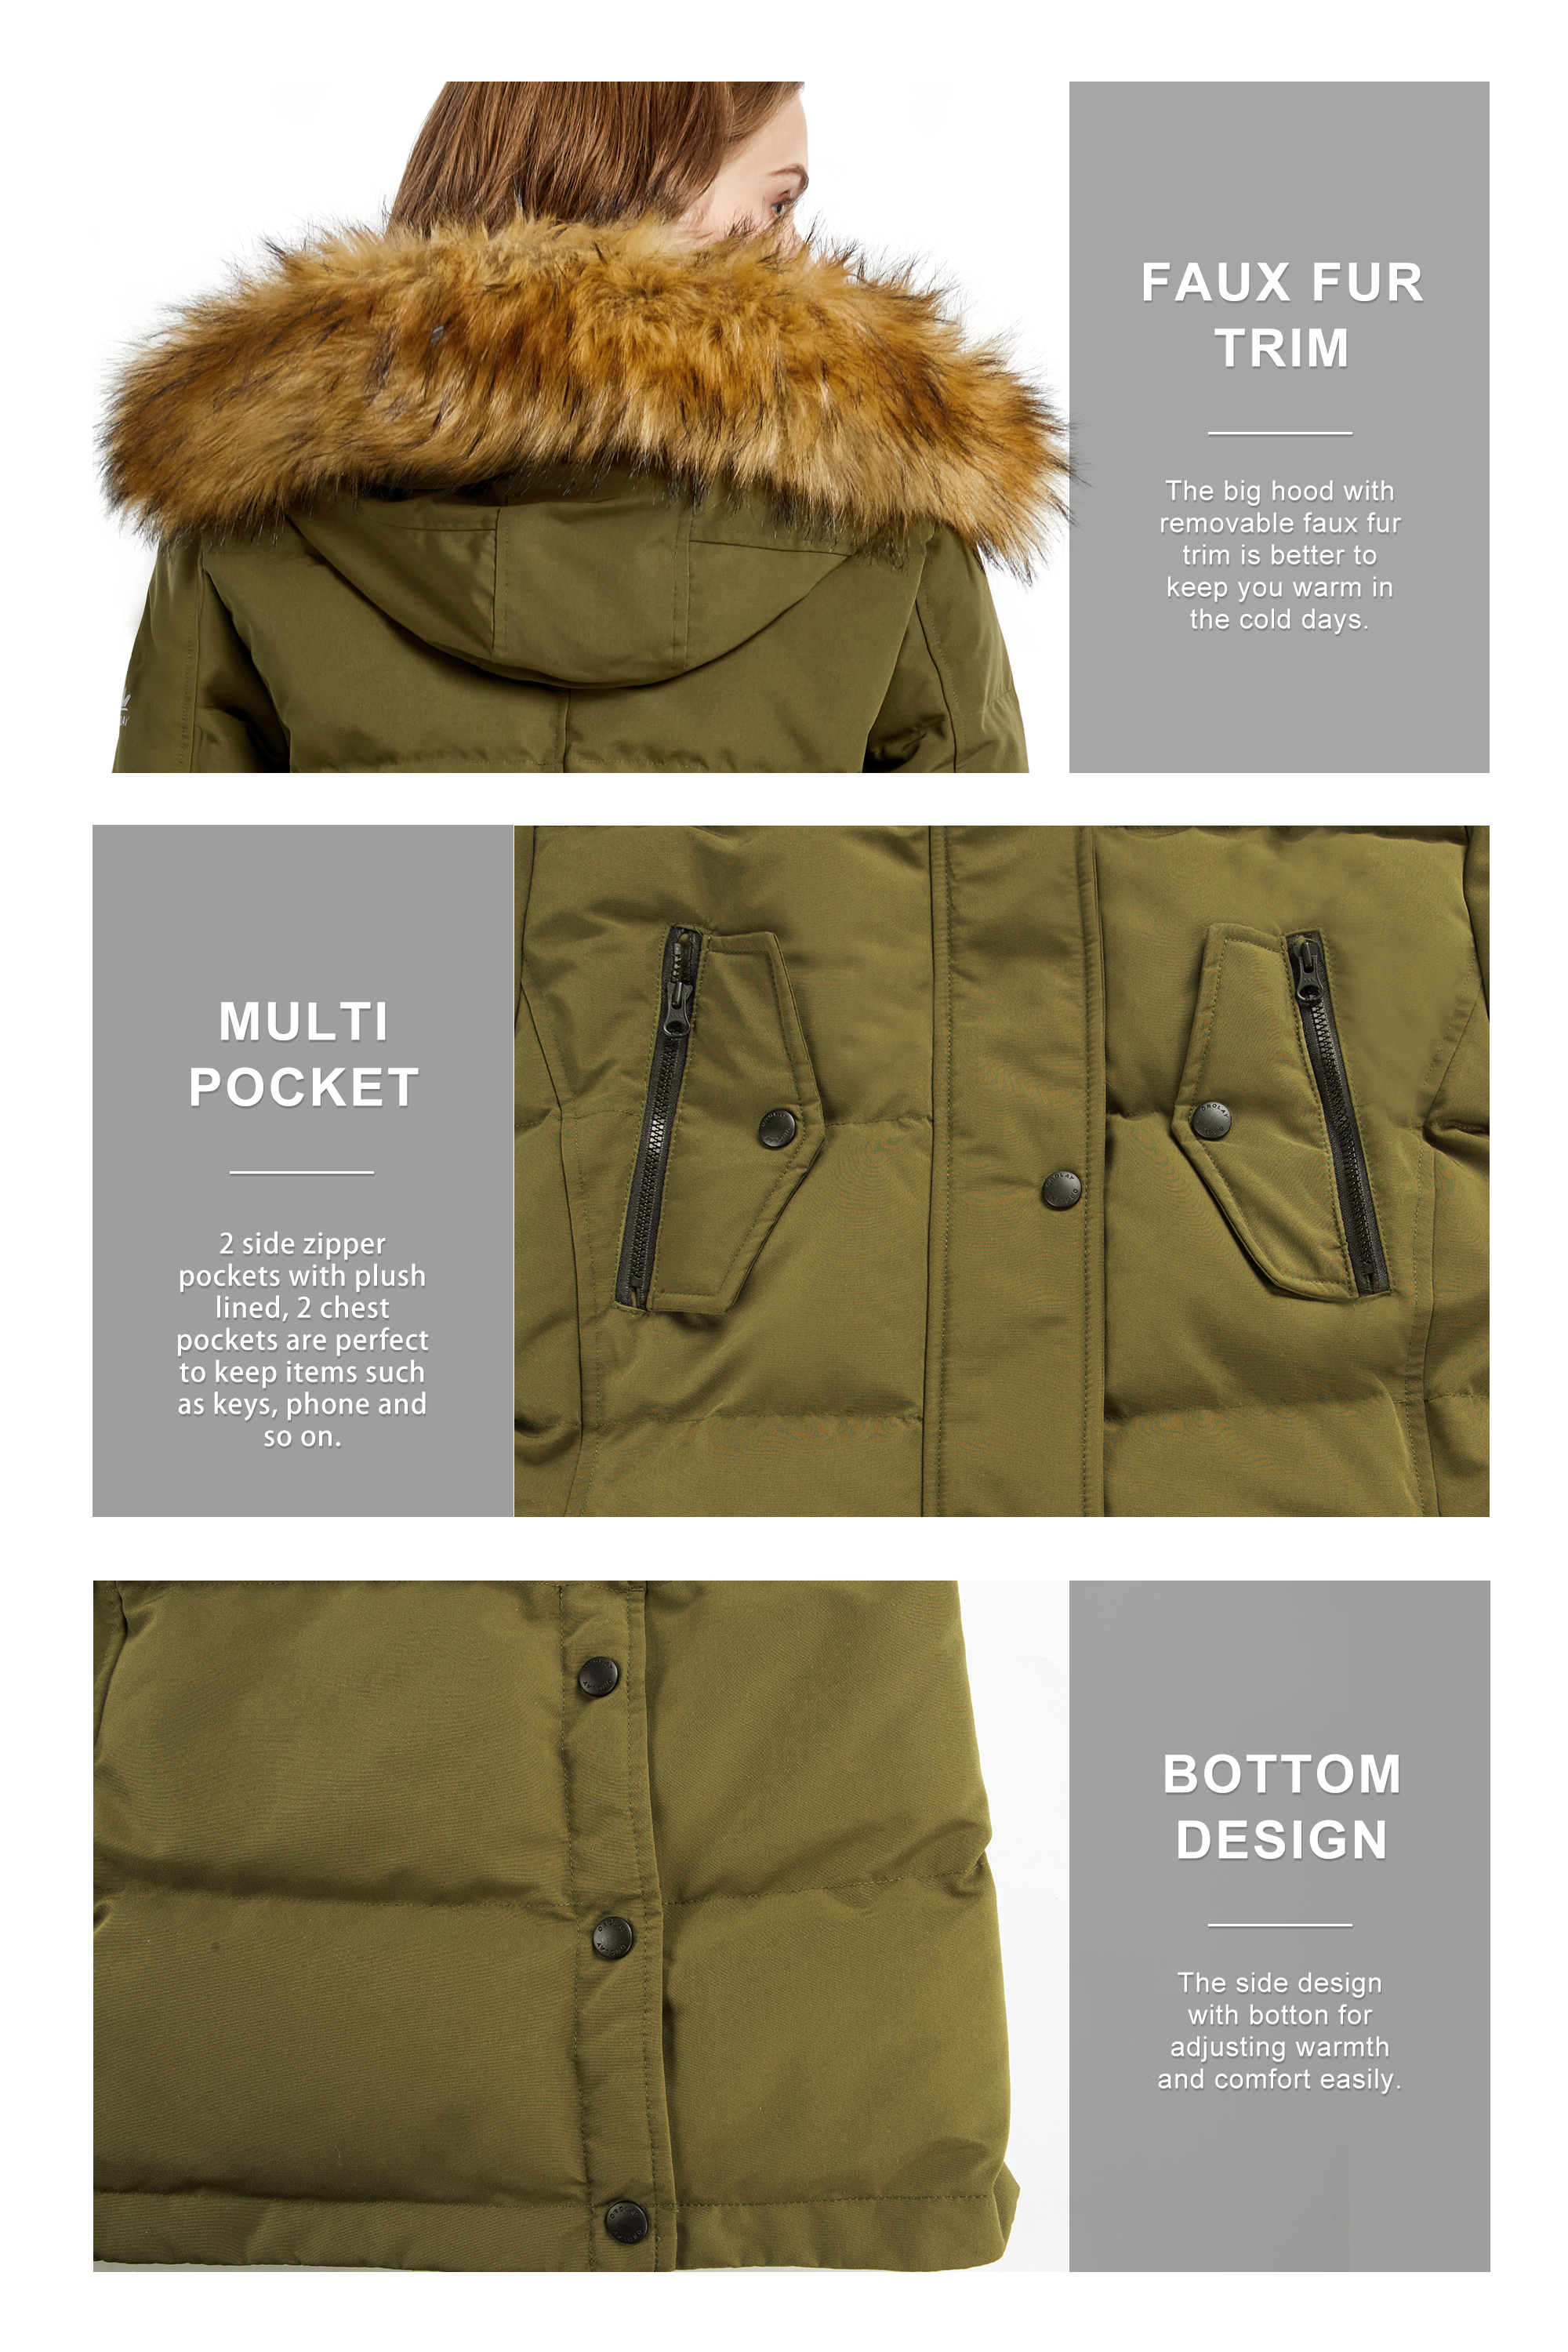 Orolay Women's Down Jacket Winter Long Coat Windproof Puffer Jacket with Fur Hood - image 4 of 5